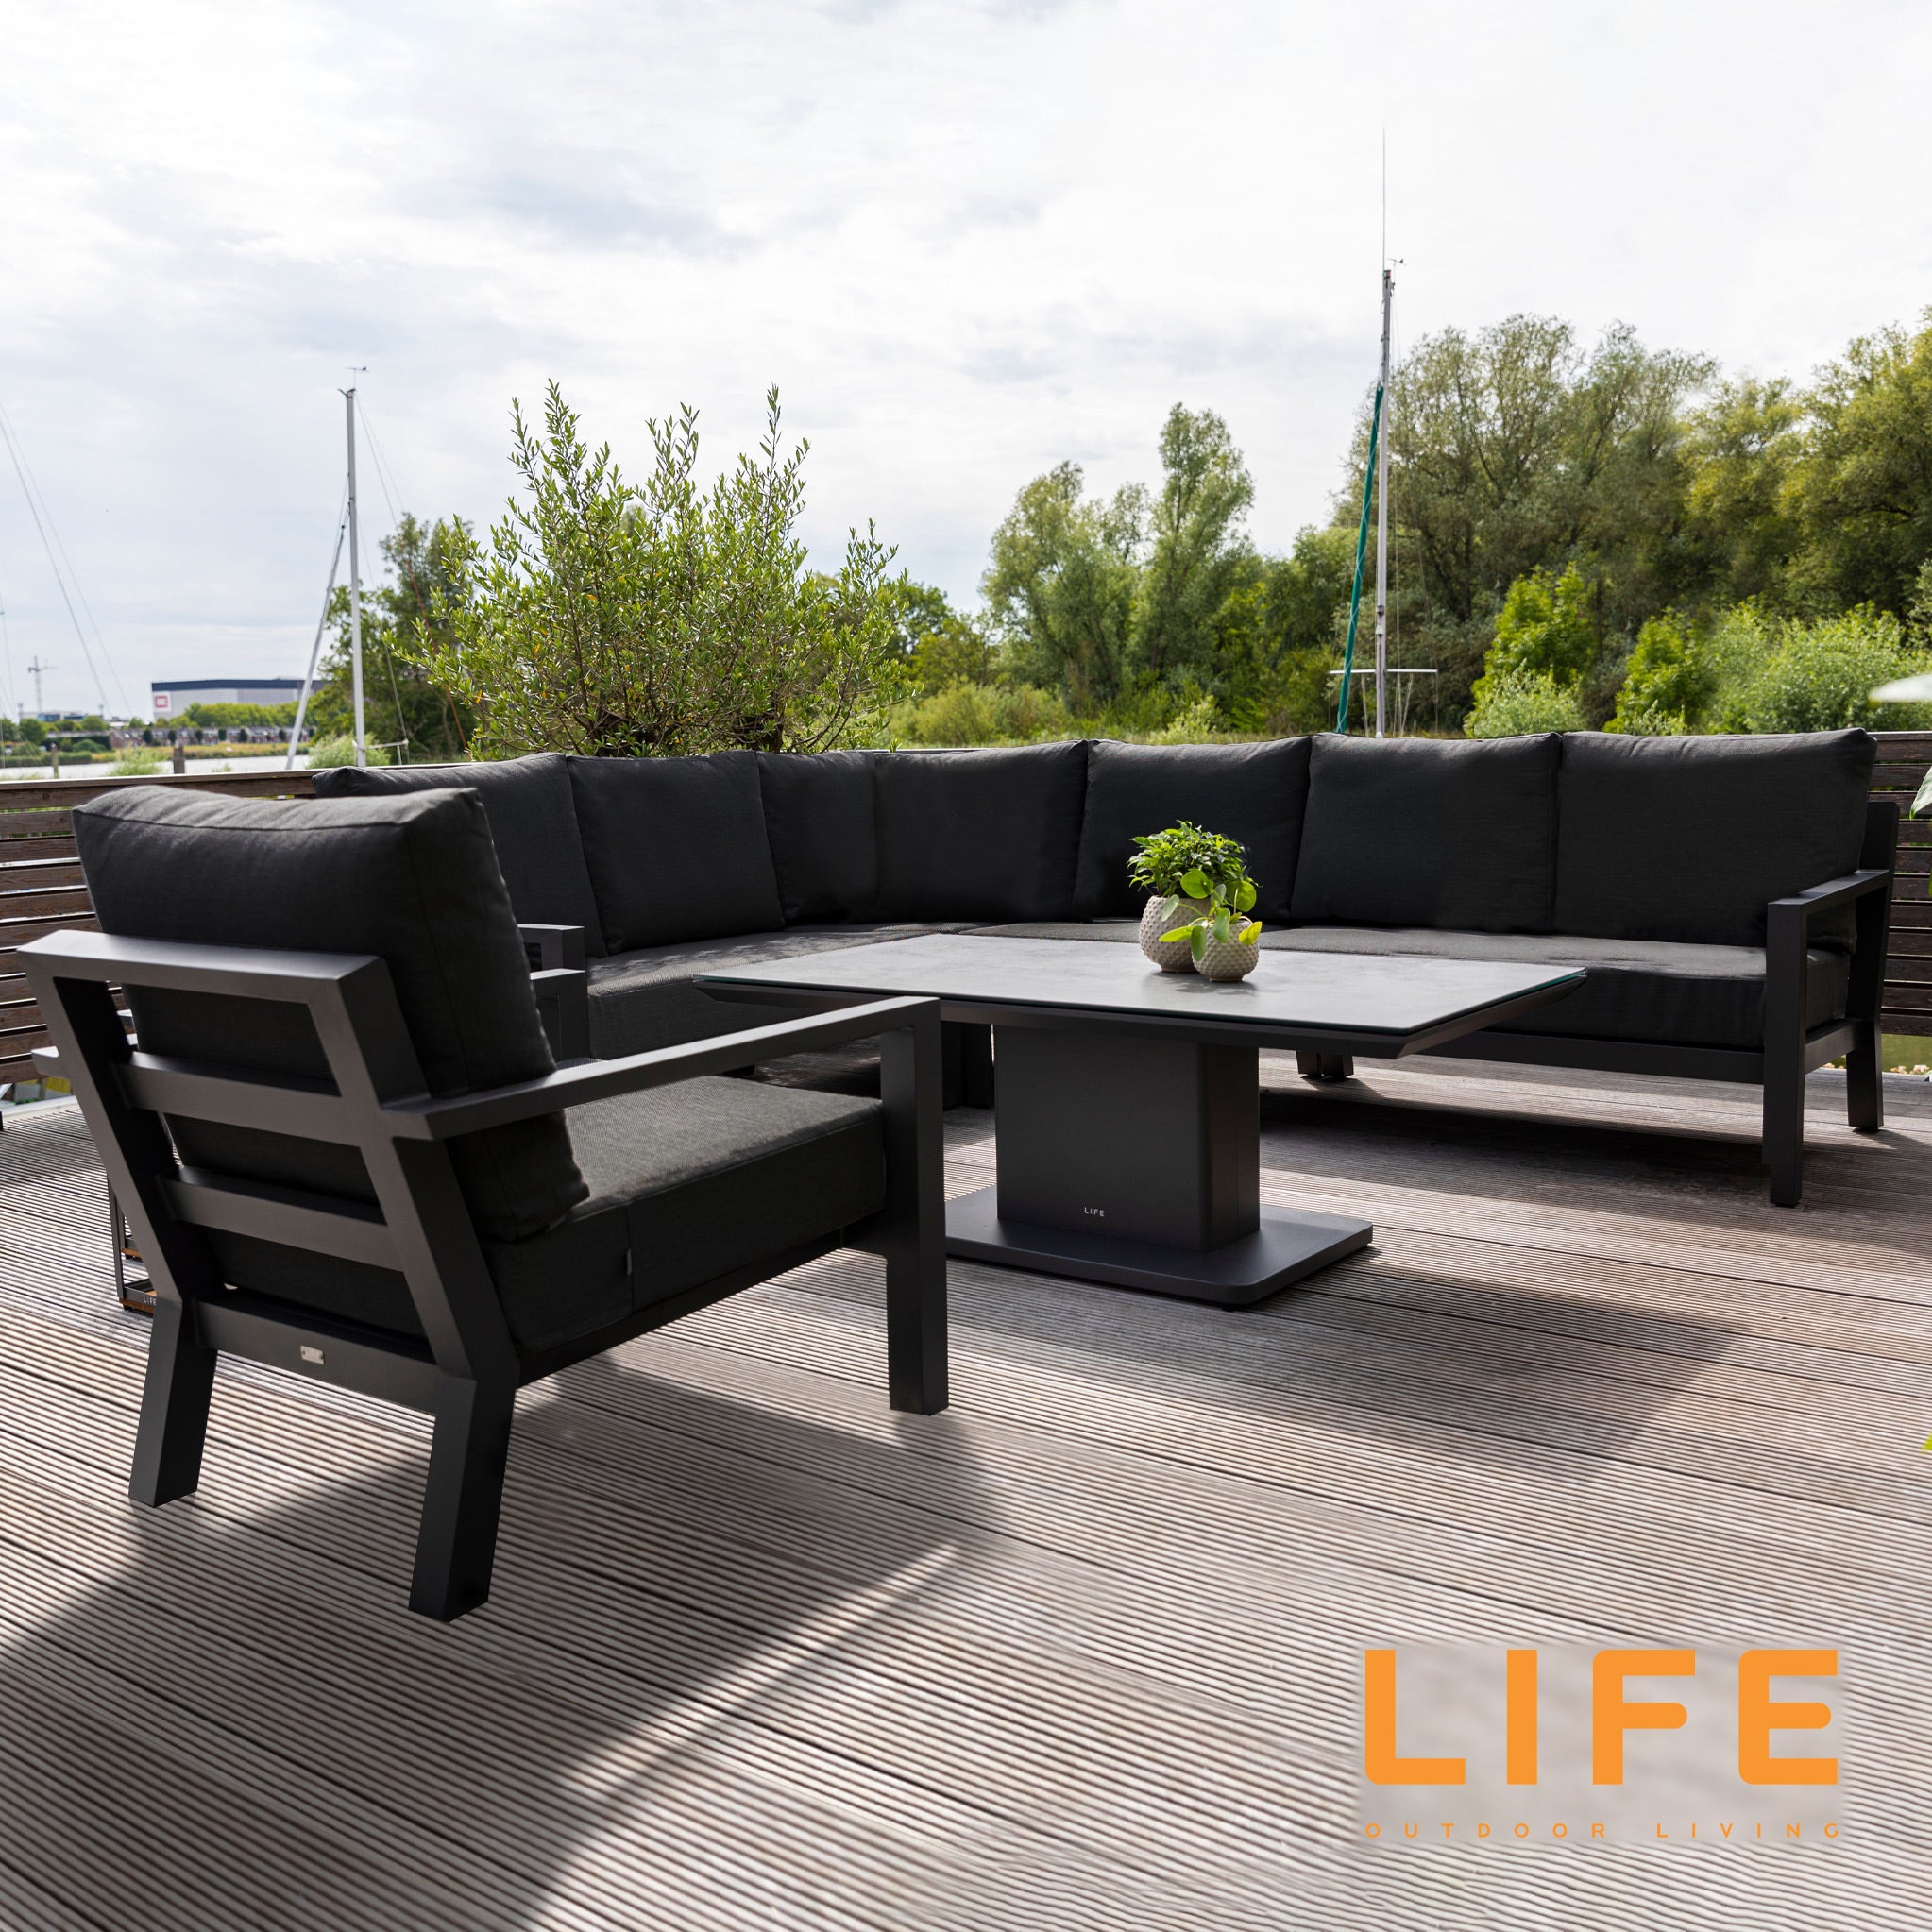 Life Timber Garden Deluxe Corner Sofa With Ceramic Adjustable Table